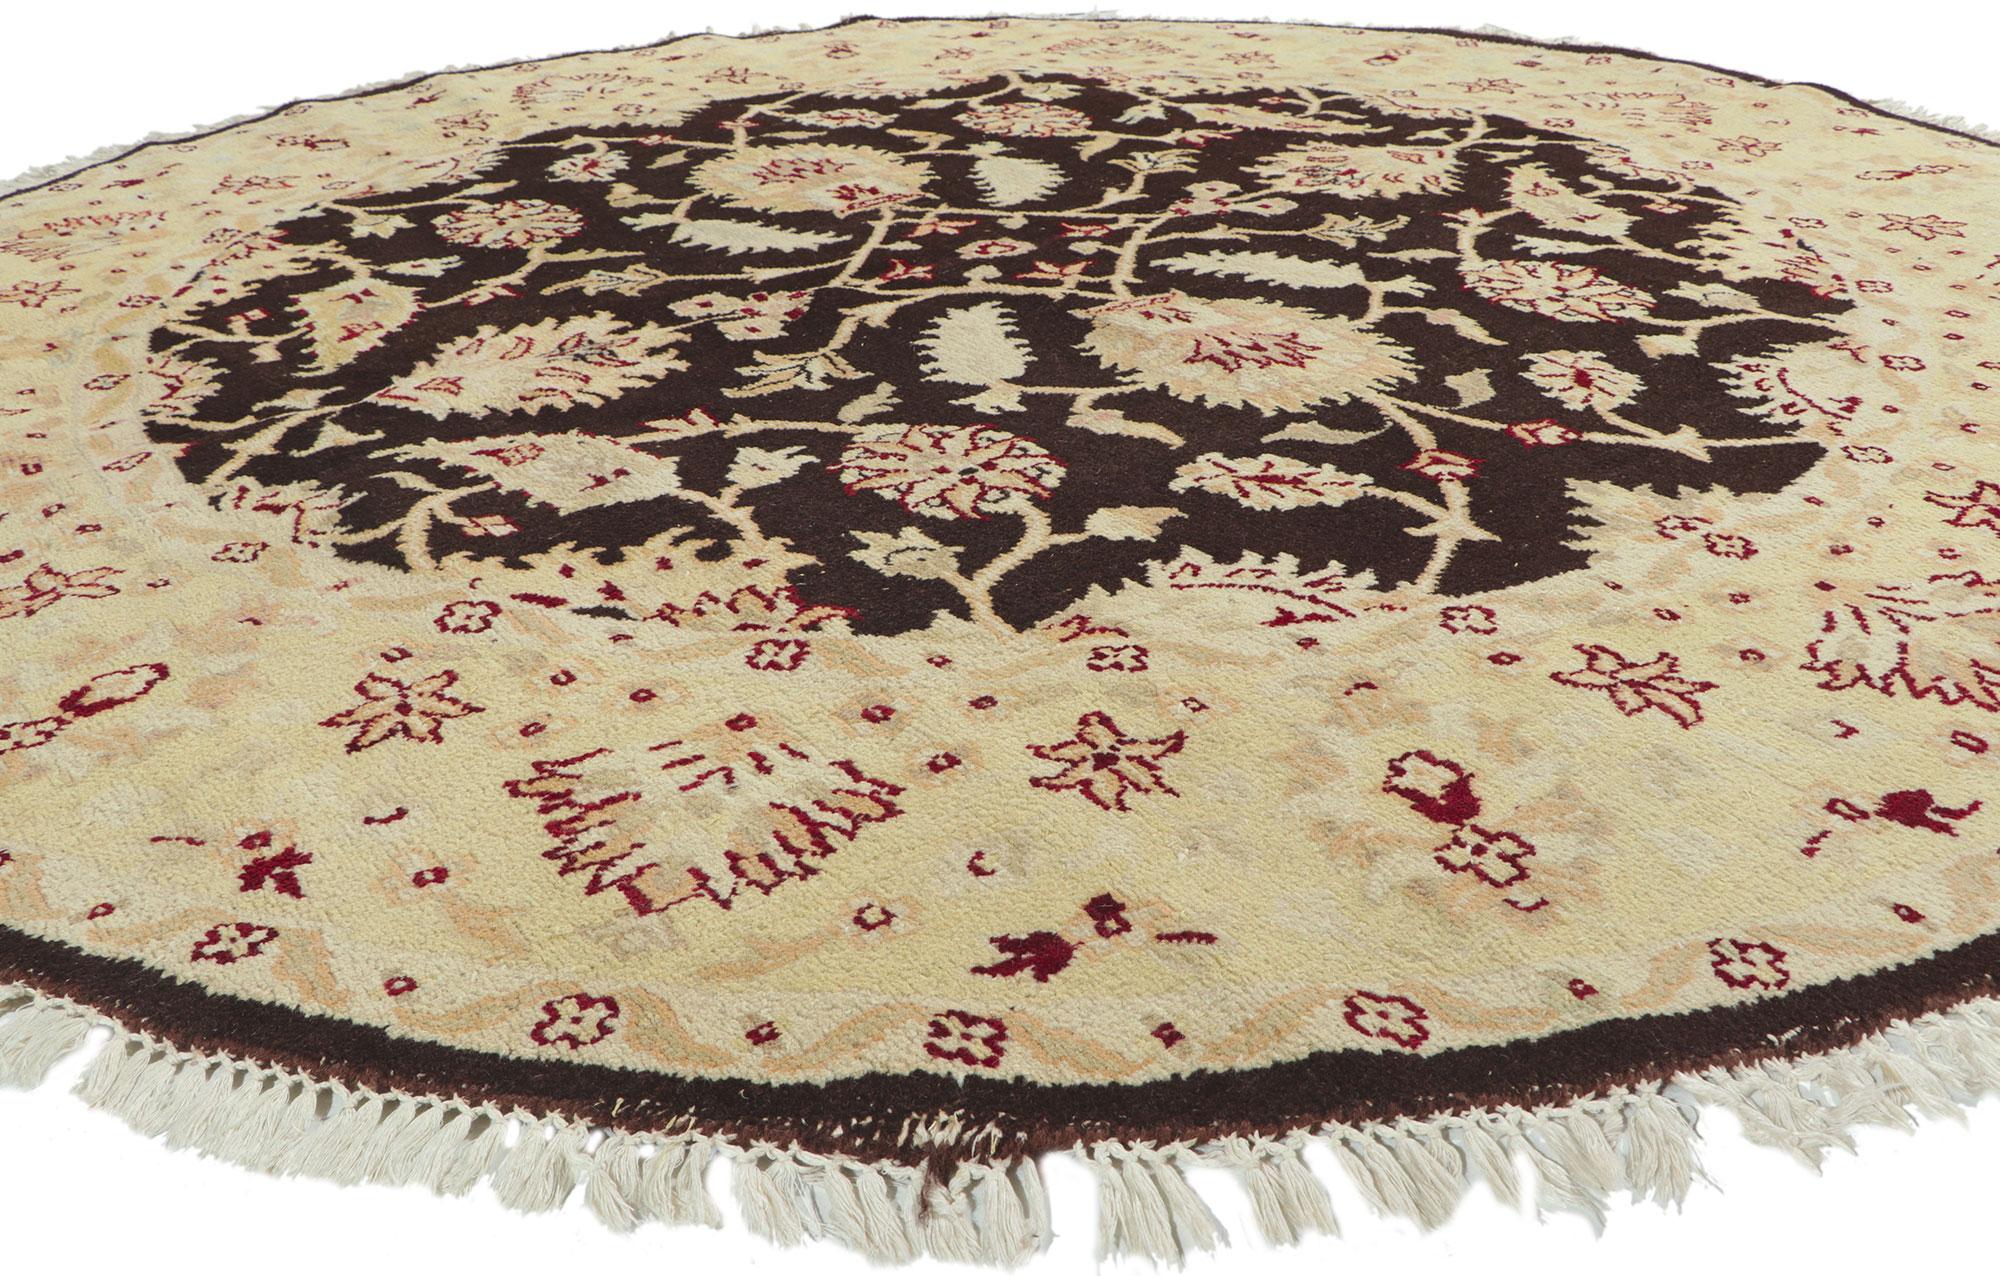 76922 Vintage Persian Style Round Area Rug 08'00 x 08'01. Decorative detailing and effortless beauty meet obliquely feminine vibes with traditional Persian style in this hand knotted wool vintage Indian round area rug. Taking center stage is an